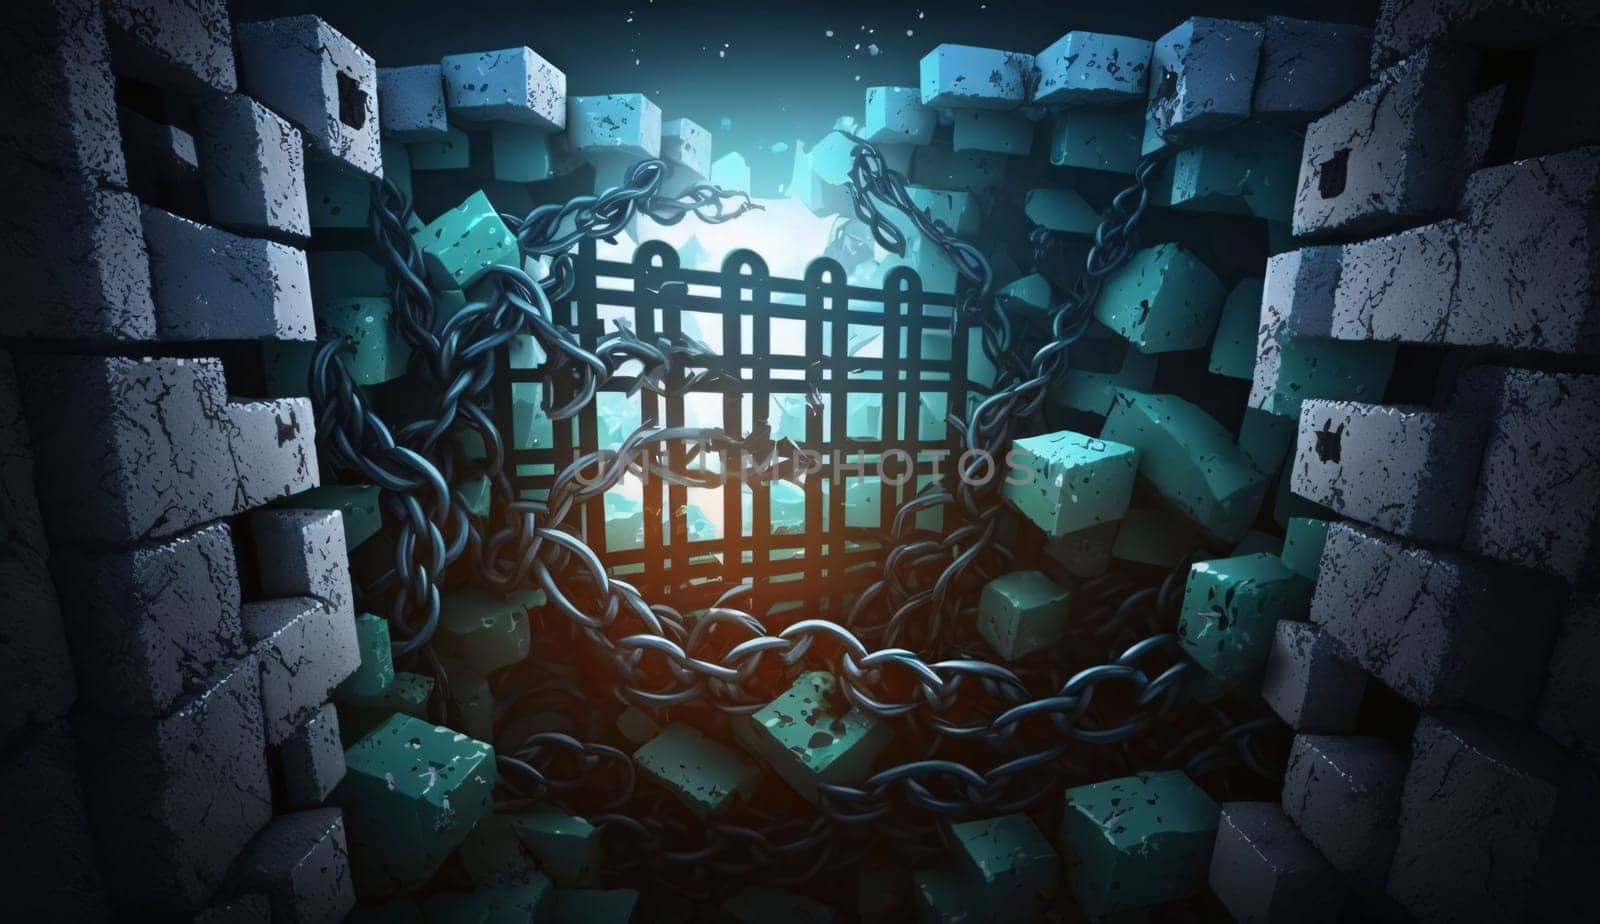 Digital background image with chain and padlock against dark background 3D rendering by ThemesS